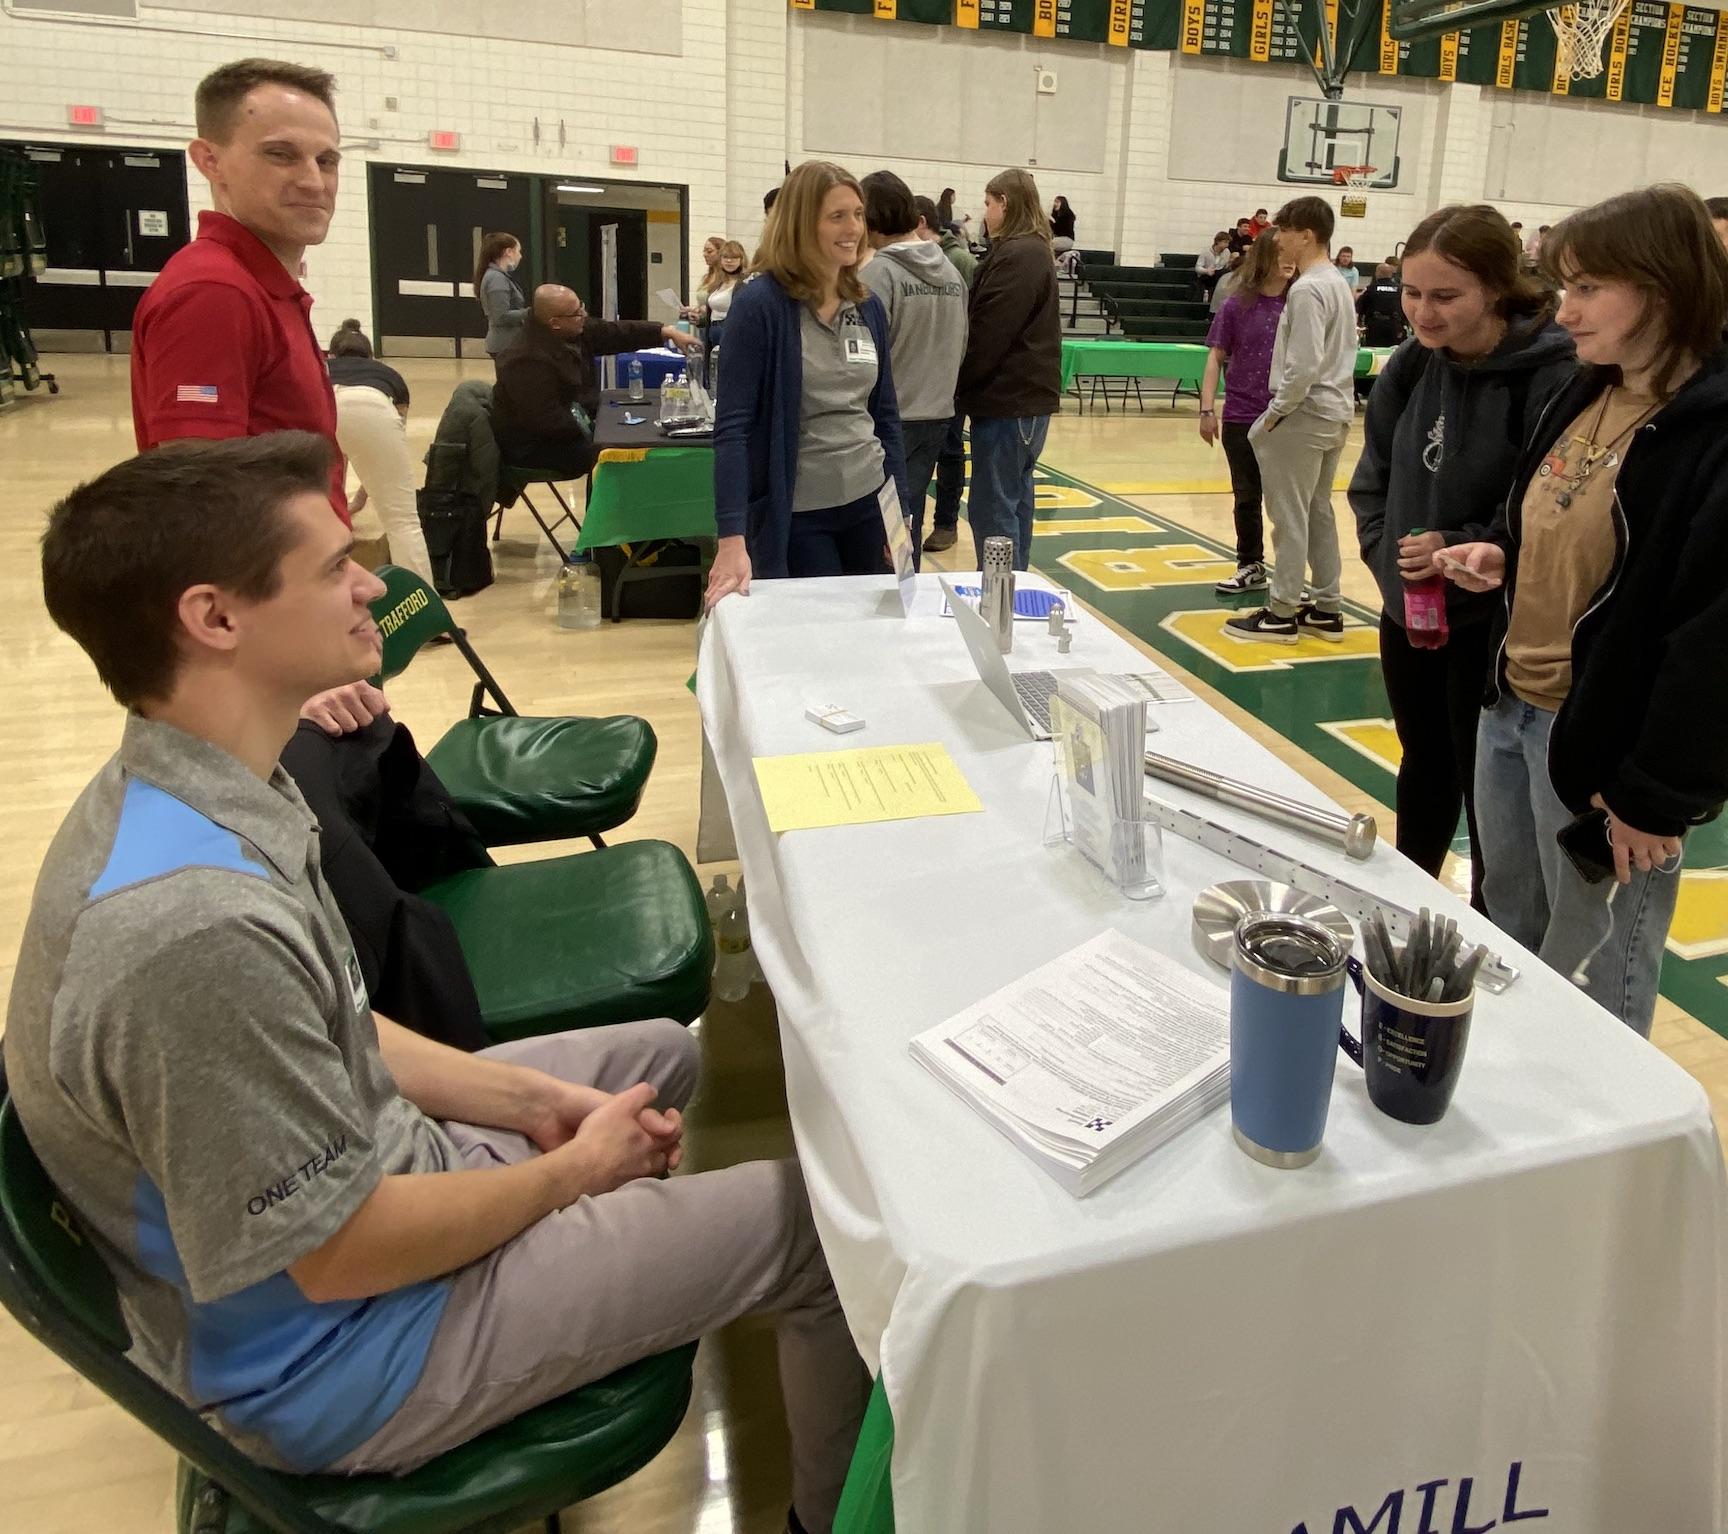 Hammill Manufacturing representatives discuss job shadowing opportunities with students interested in a career in STEM